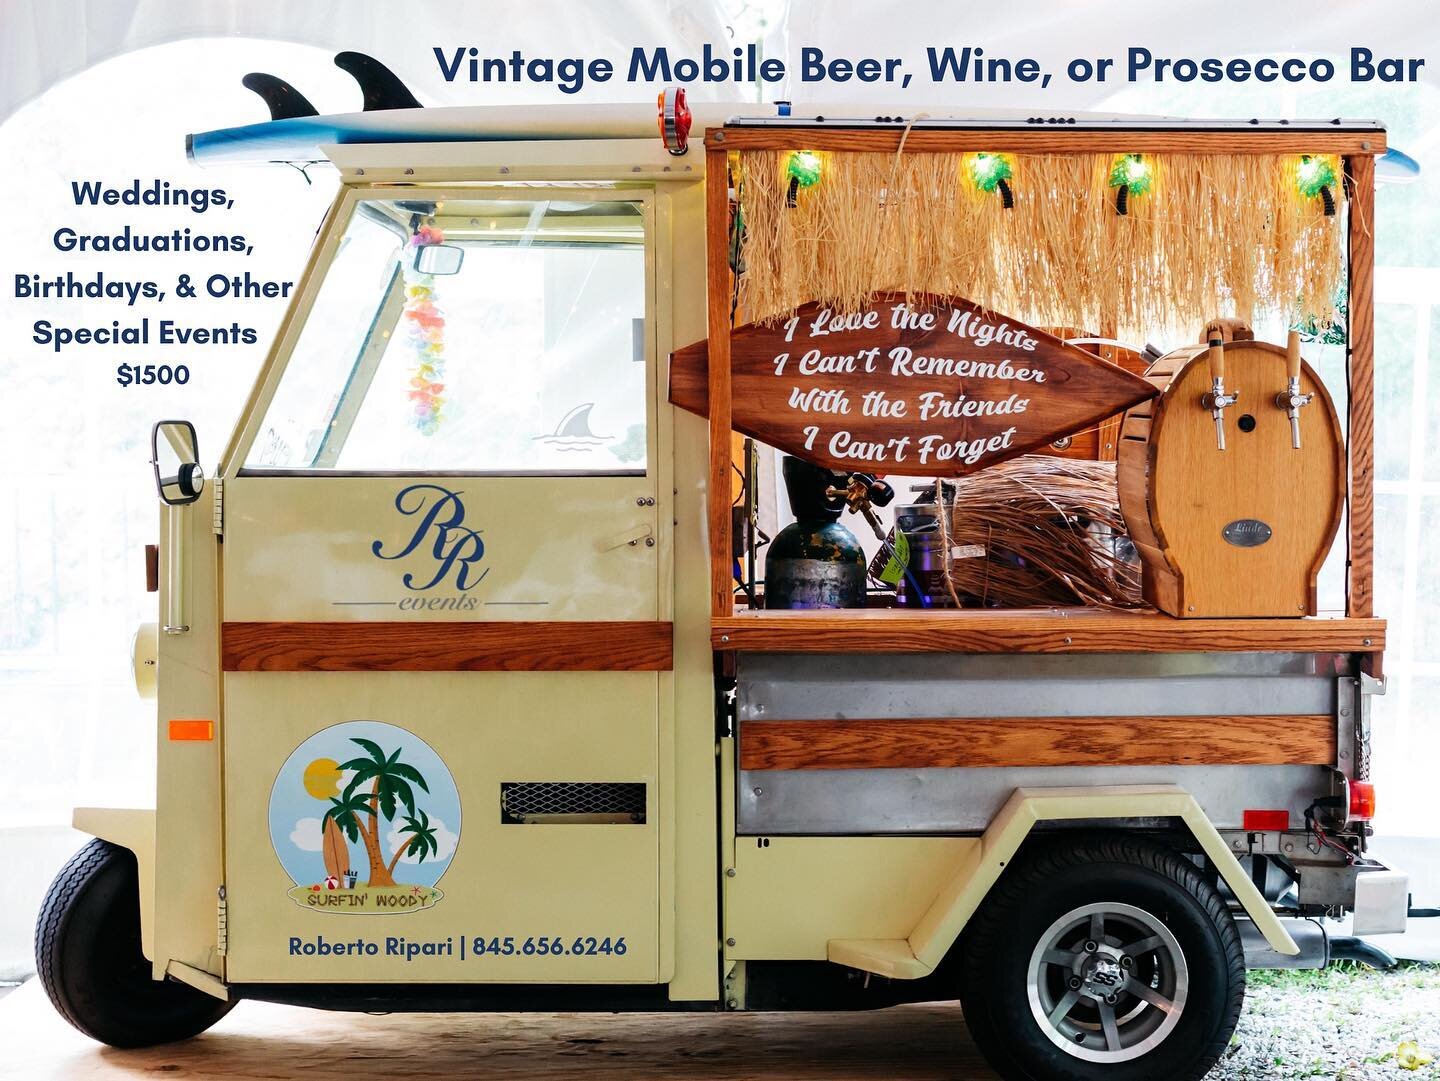 Unique customized mobile bar tap for beer, wine, or Prosecco for your next special event. 

#weddings #graduation #rreventsny